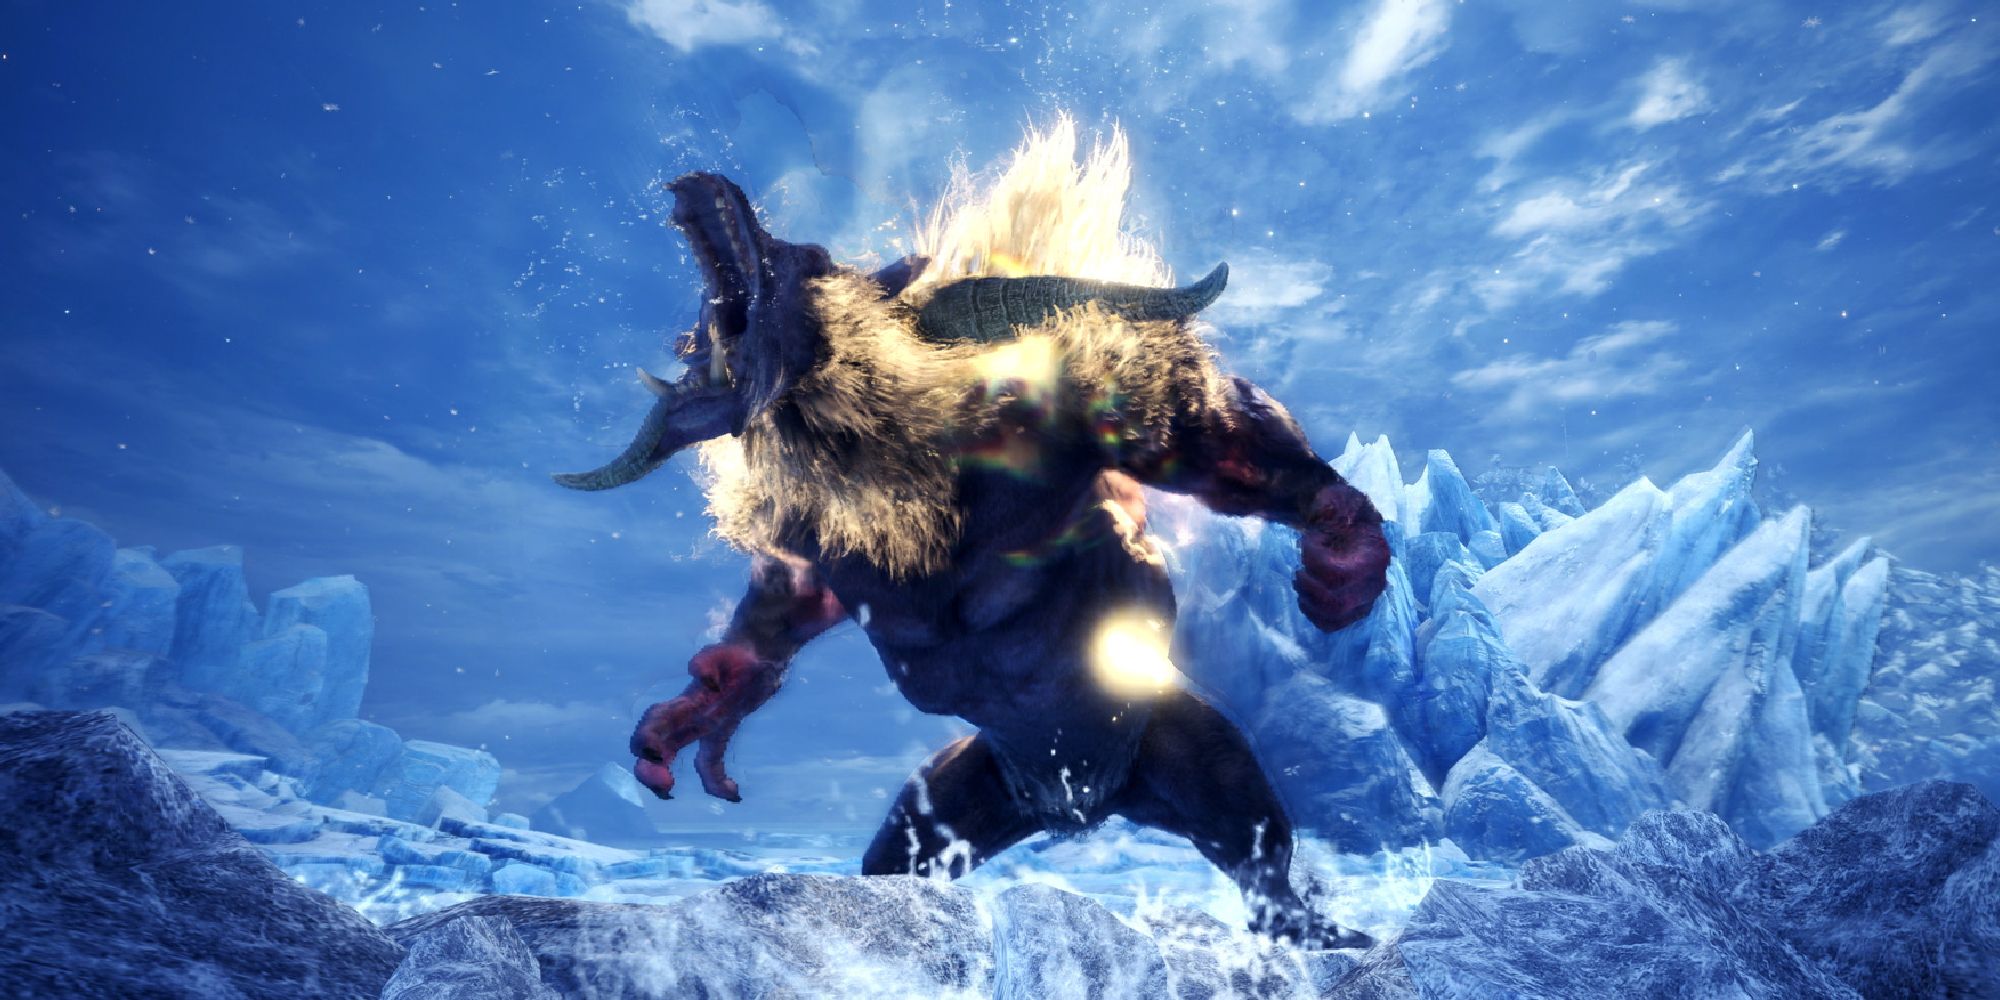 Furious Rajang on a snowy mountain screaming in Monster Hunter World Iceborne